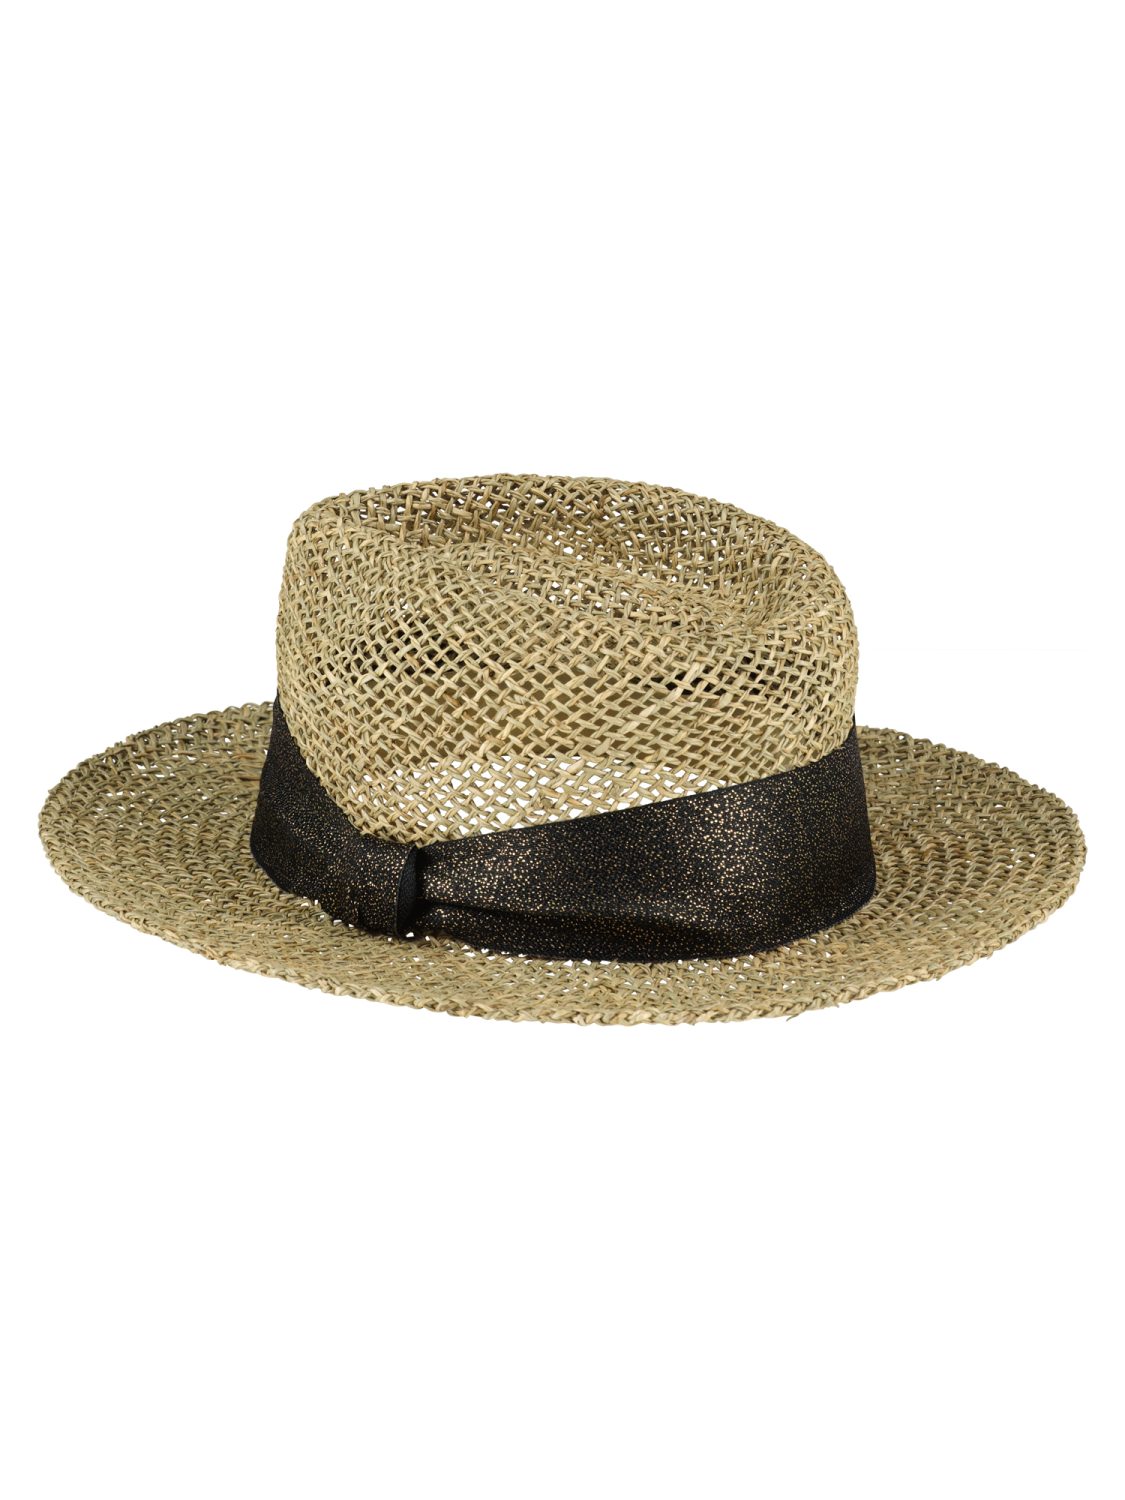 Seagrass hat+front